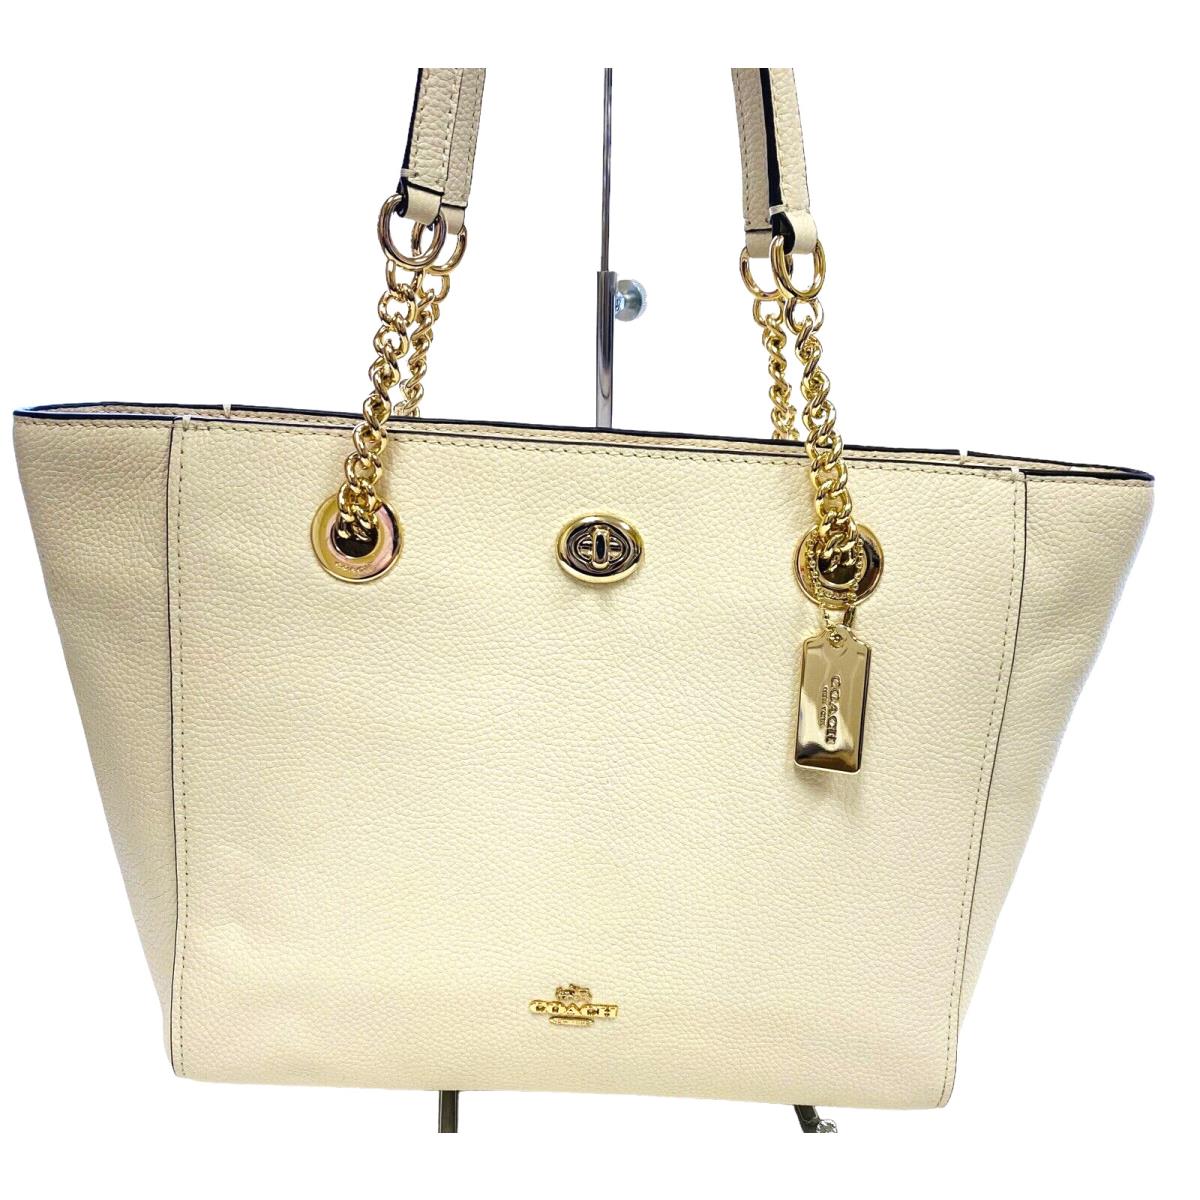 Coach Turnlock Chain Tote 27 Chalk White Pebble Leather Shoulder Bag 57107